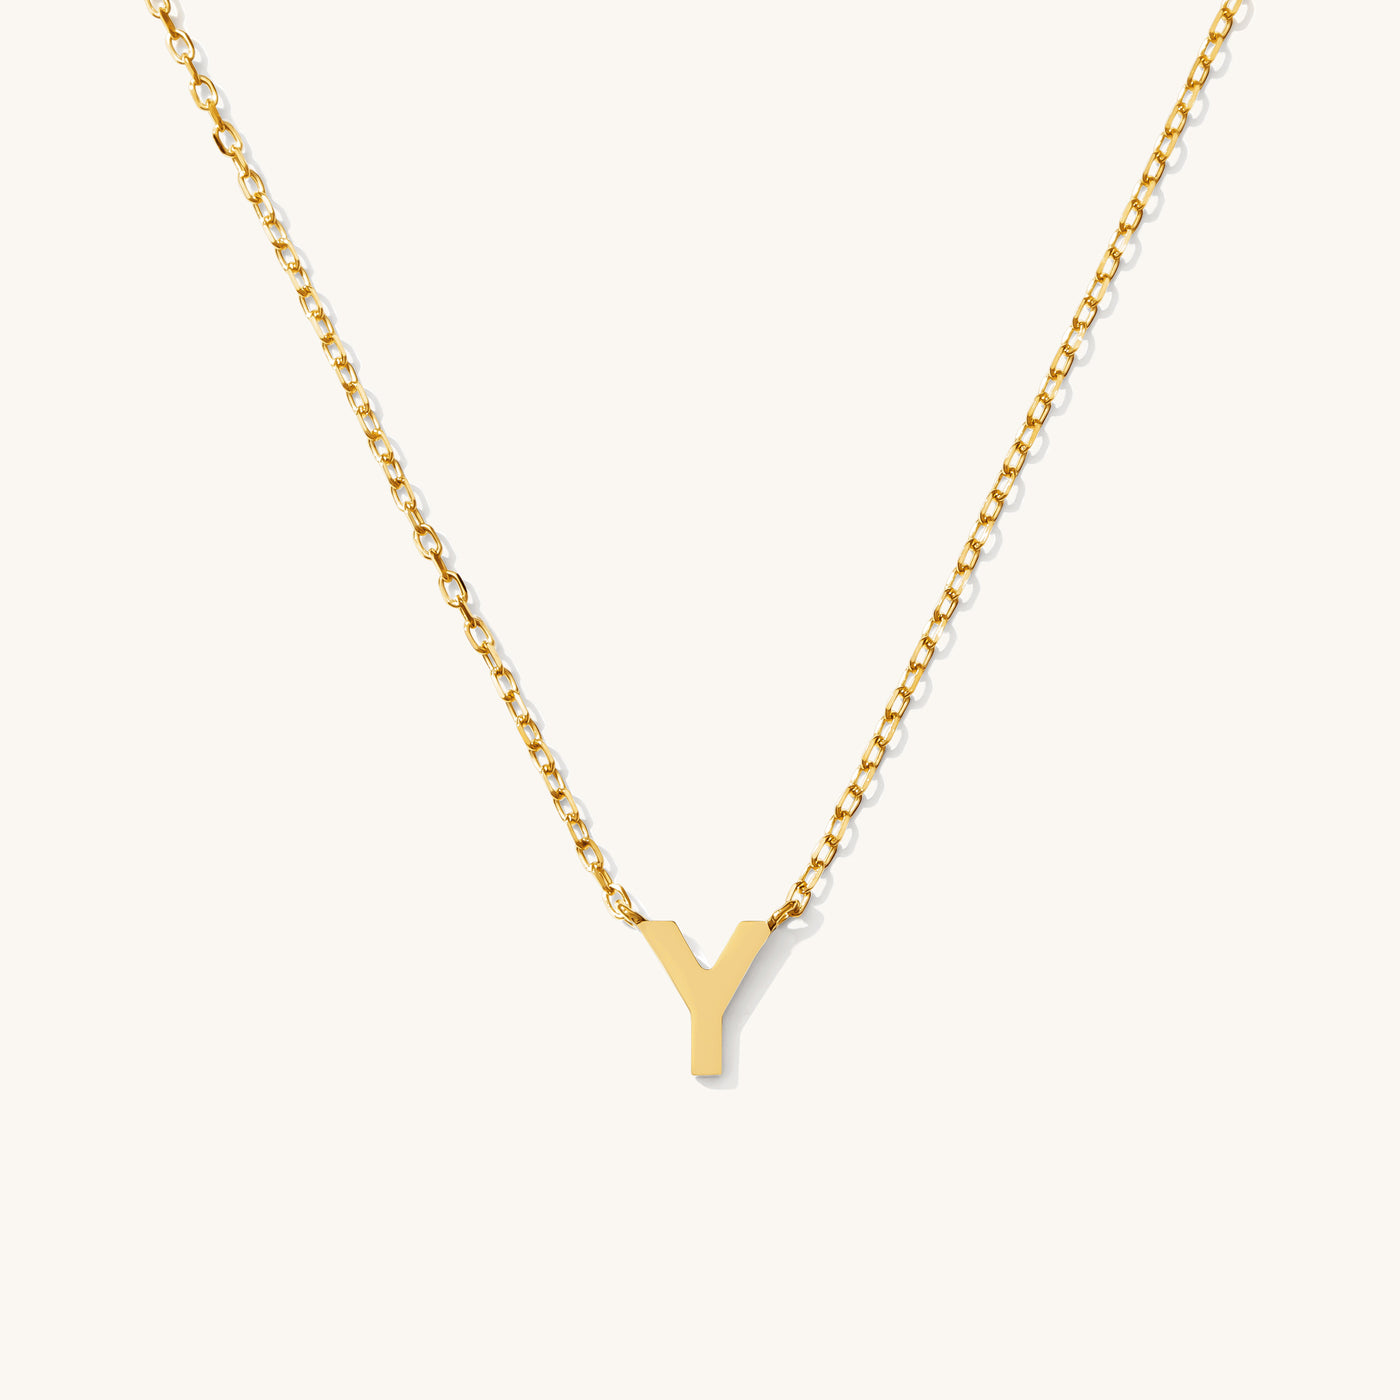 Y Tiny Initial Necklace - 14k Solid Gold